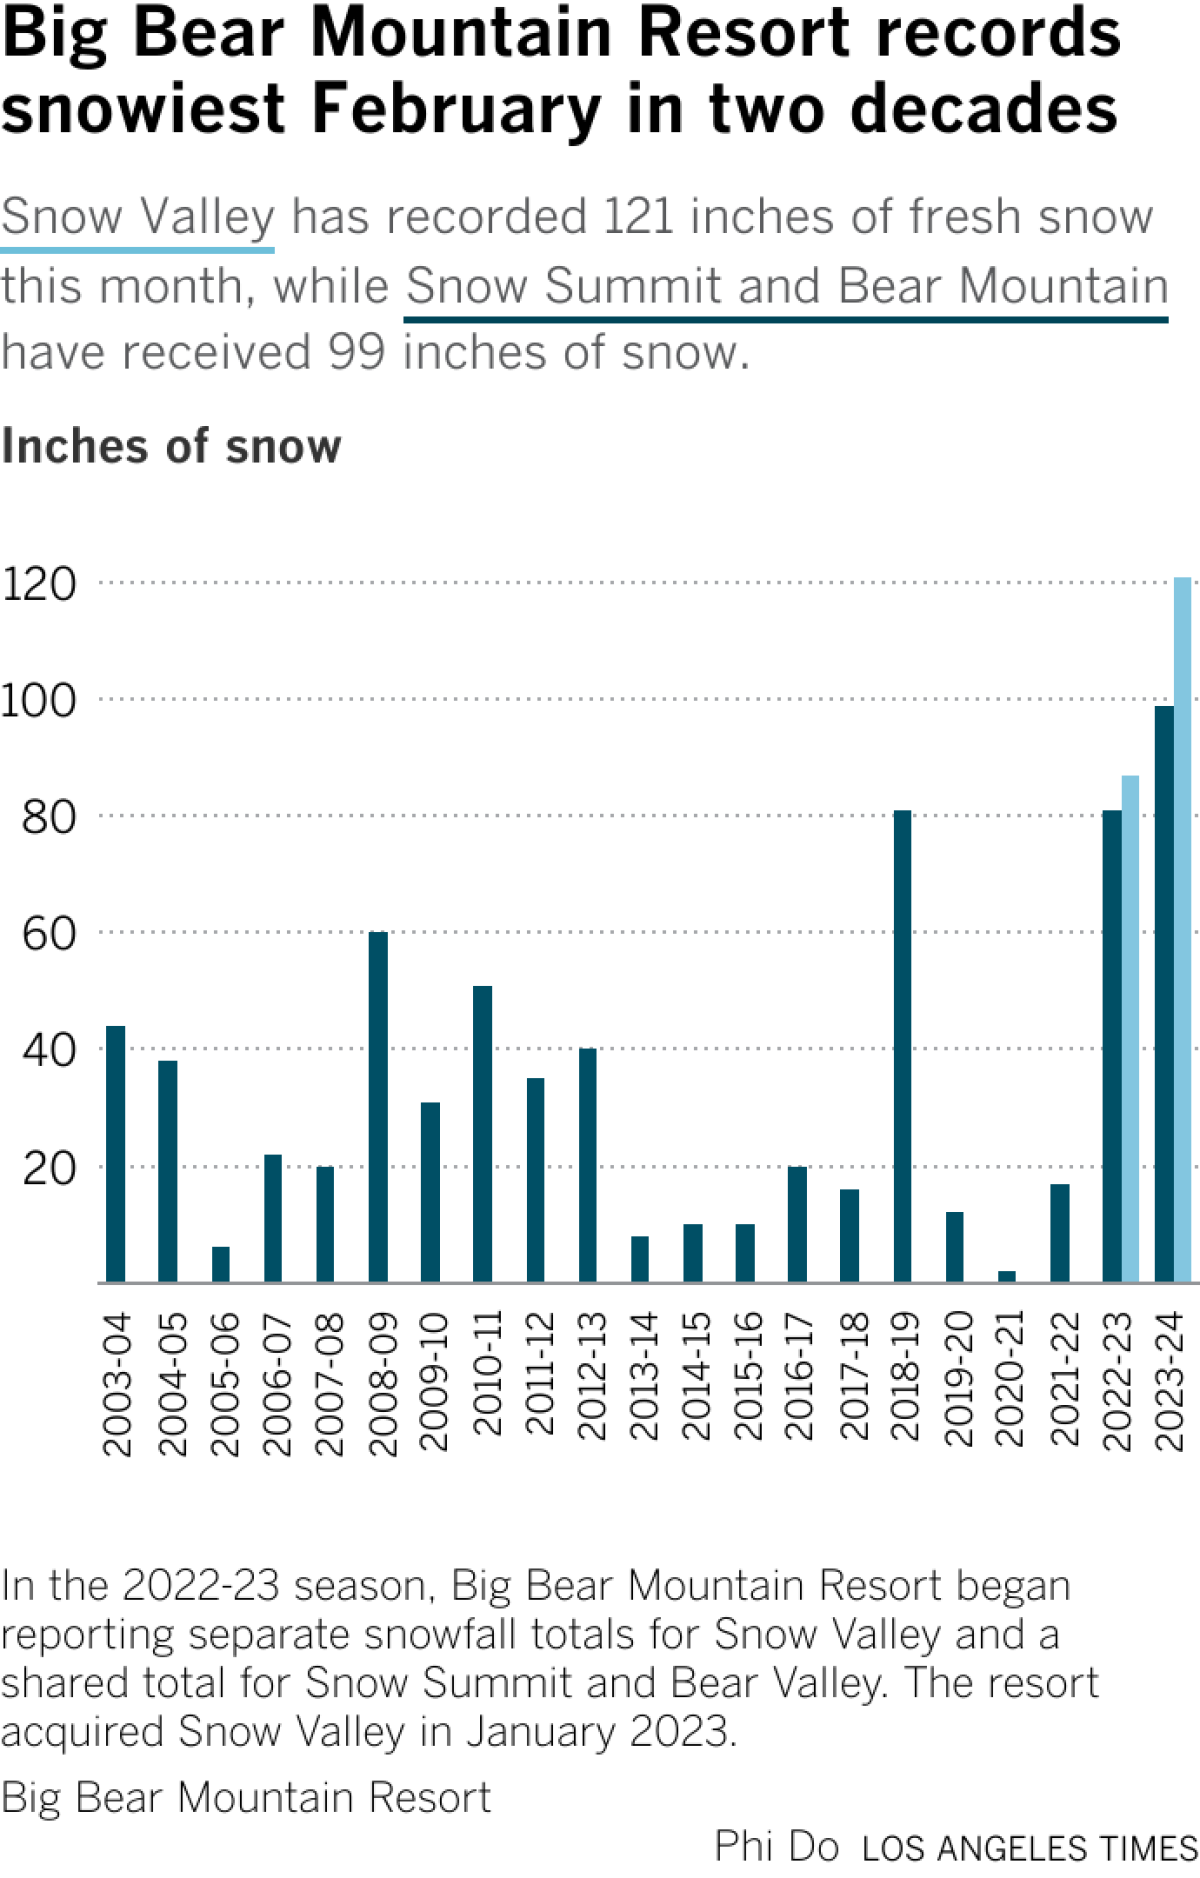 Grouped column chart showing how many inches of snow Big Bear Mountain resorts have received since 2023-04.